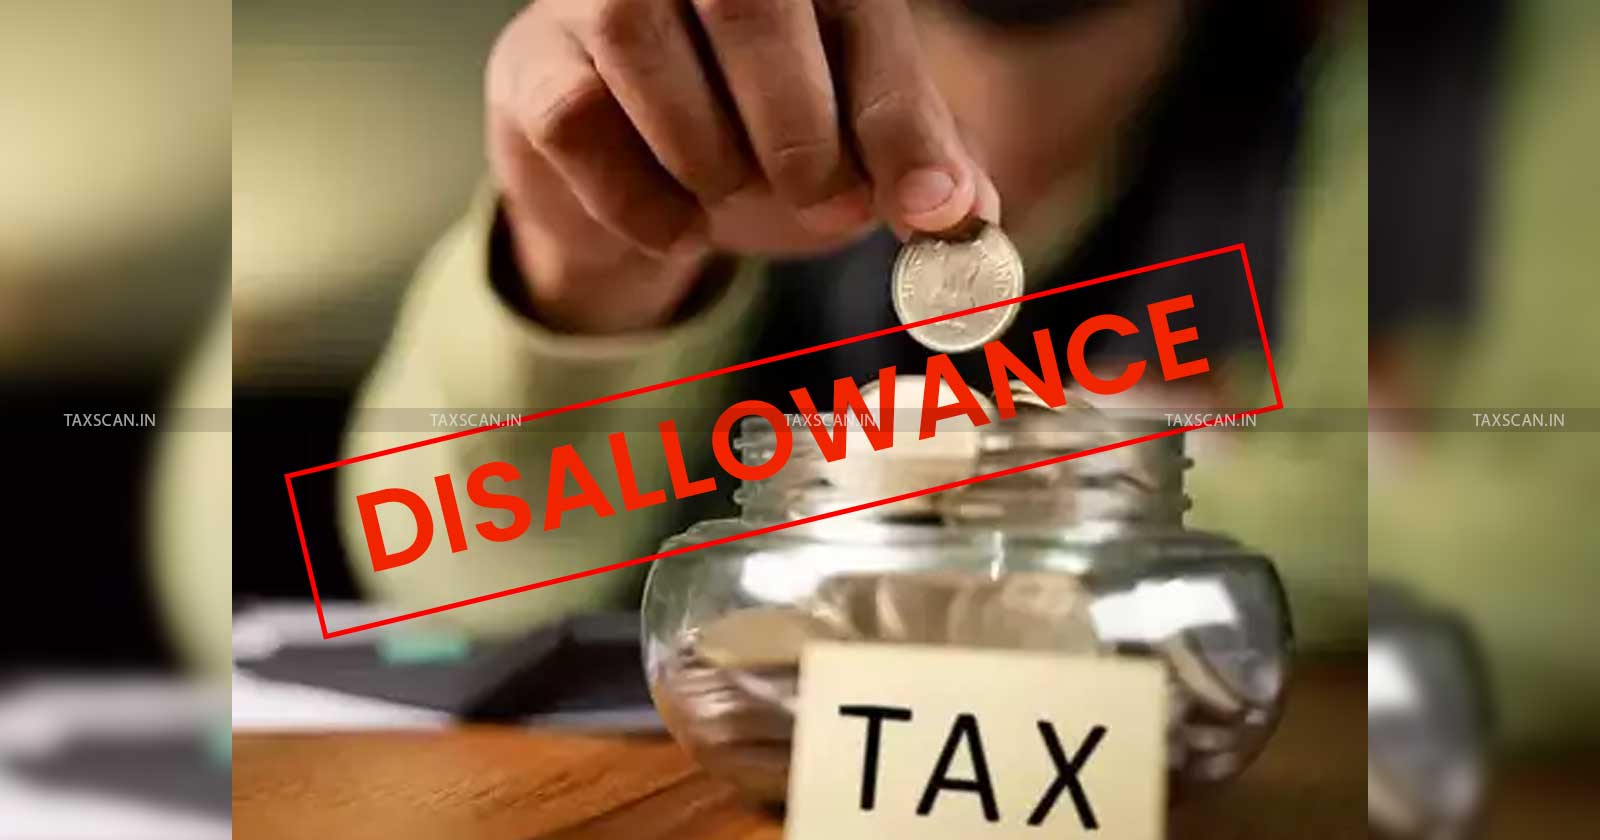 Unverified - Excessive Operating Expenses - Operating Expenses - Income Tax Act - ITAT - Disallowance - ITAT Reduces Disallowance - Income Tax - taxscan